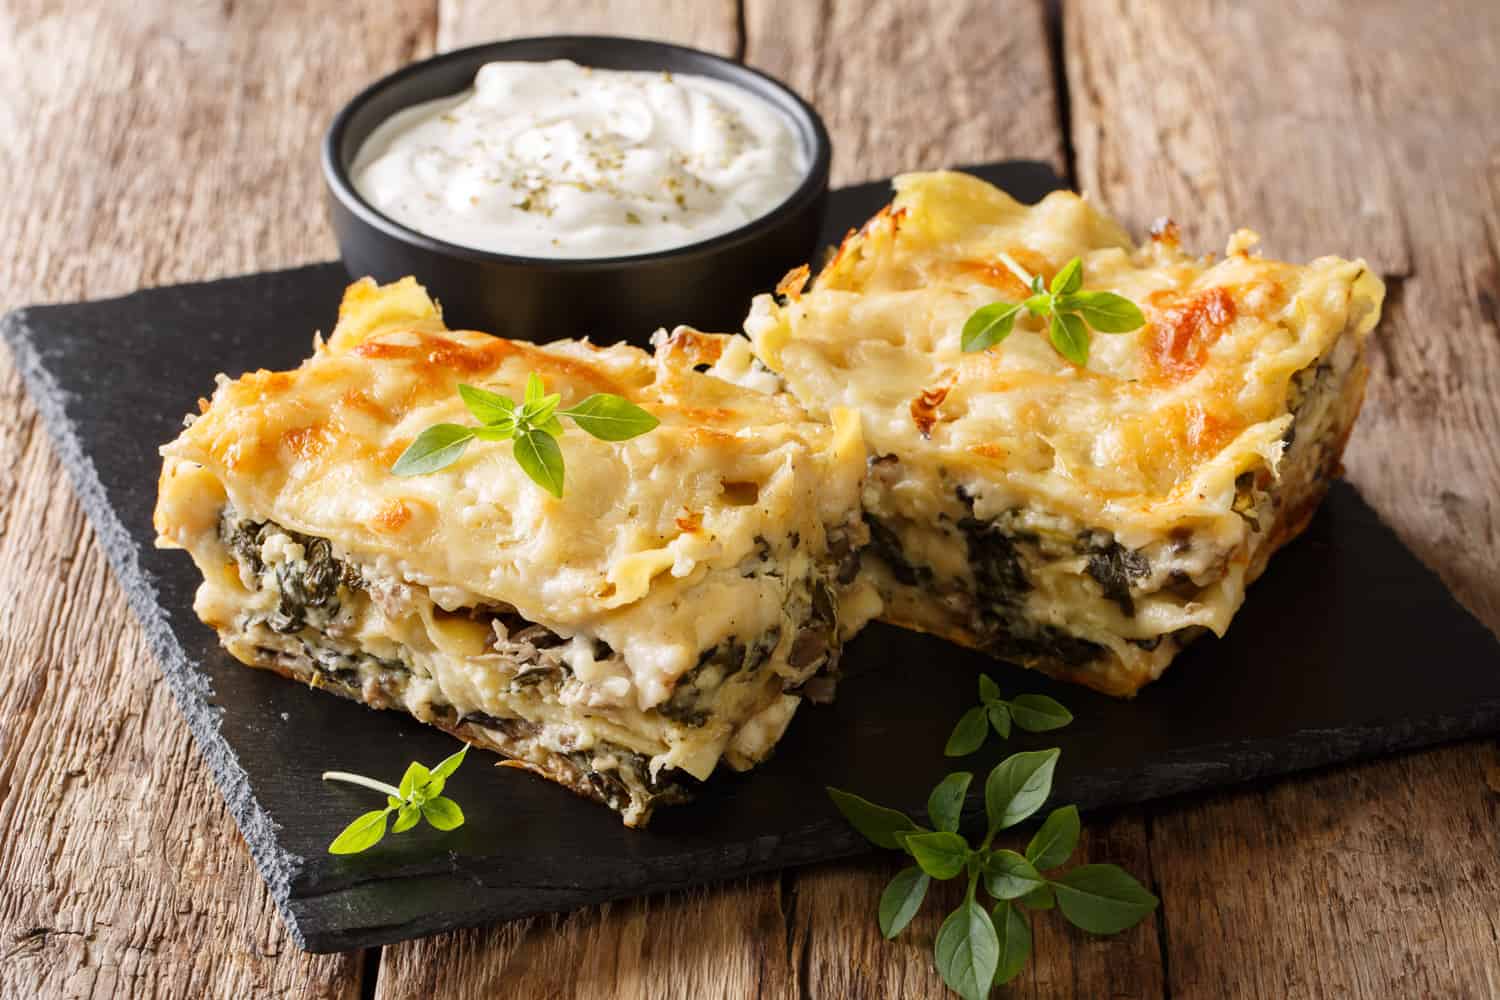 Delicious lasagna with chicken breast, porcini mushrooms, cheese, herbs and bechamel sauce close-up on a slate plate on a wooden table.